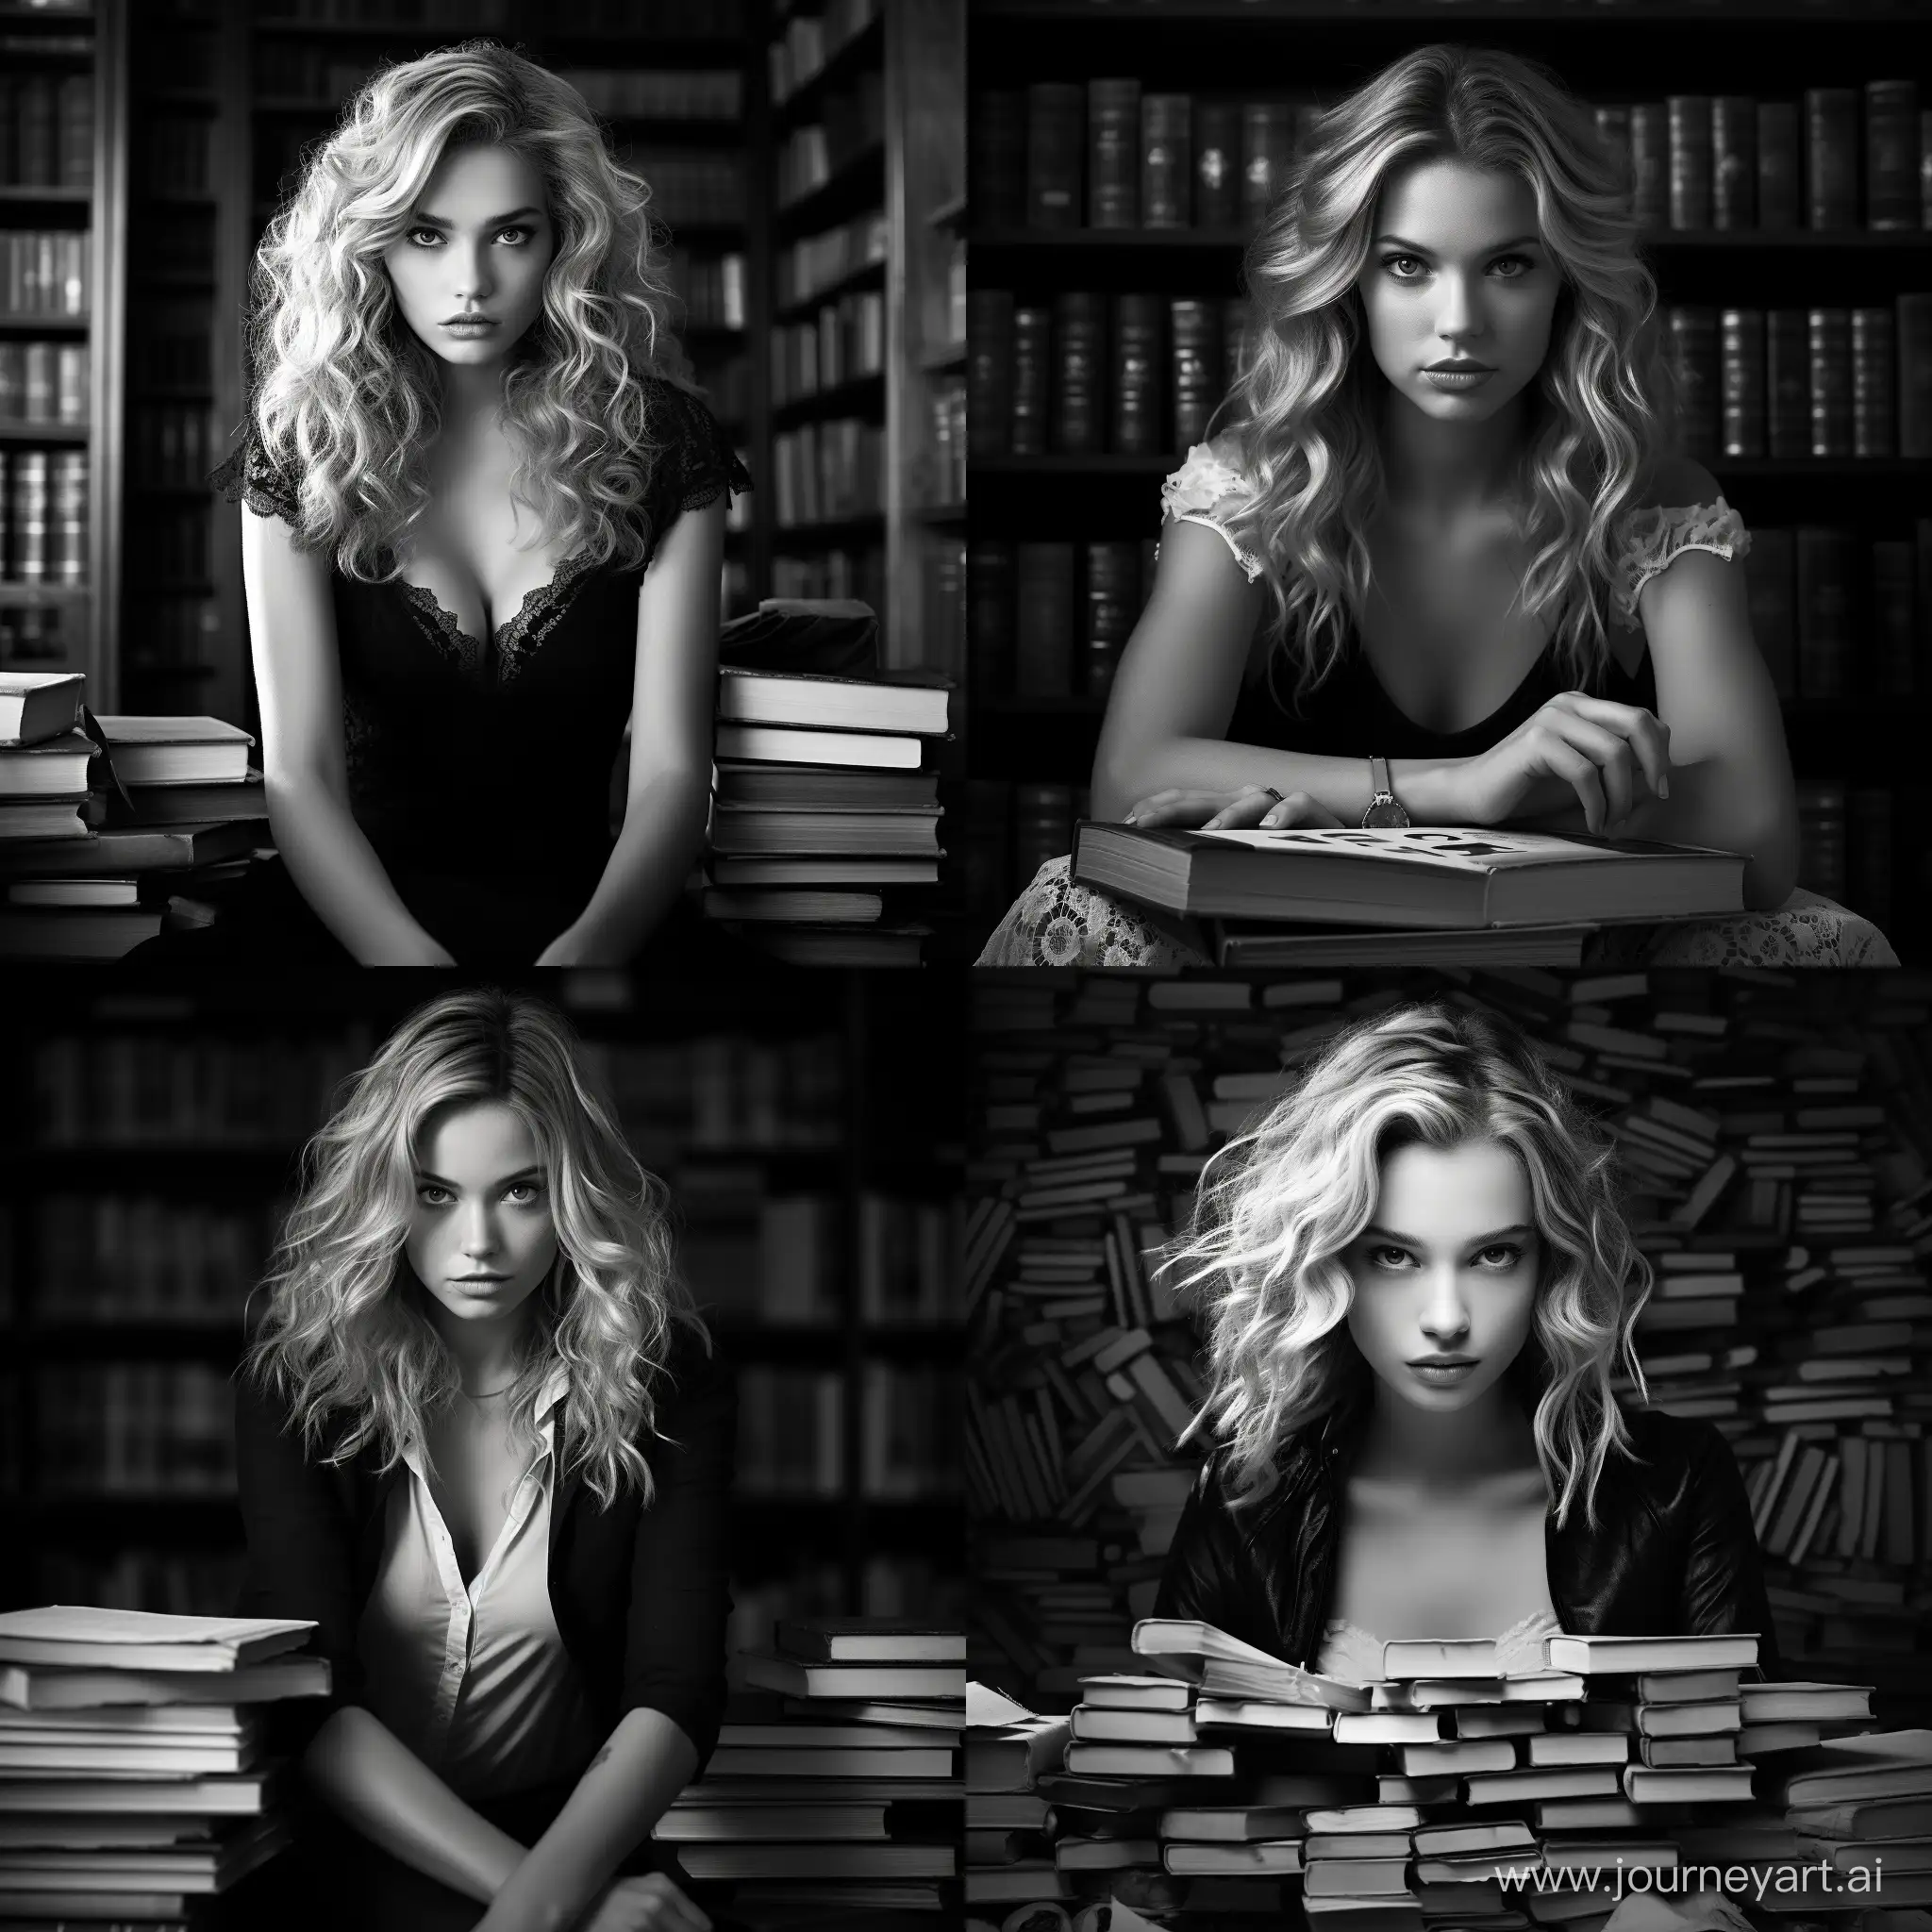 Wise-Blonde-Girl-Surrounded-by-Books-Empowering-Feminine-Wisdom-in-Monochrome